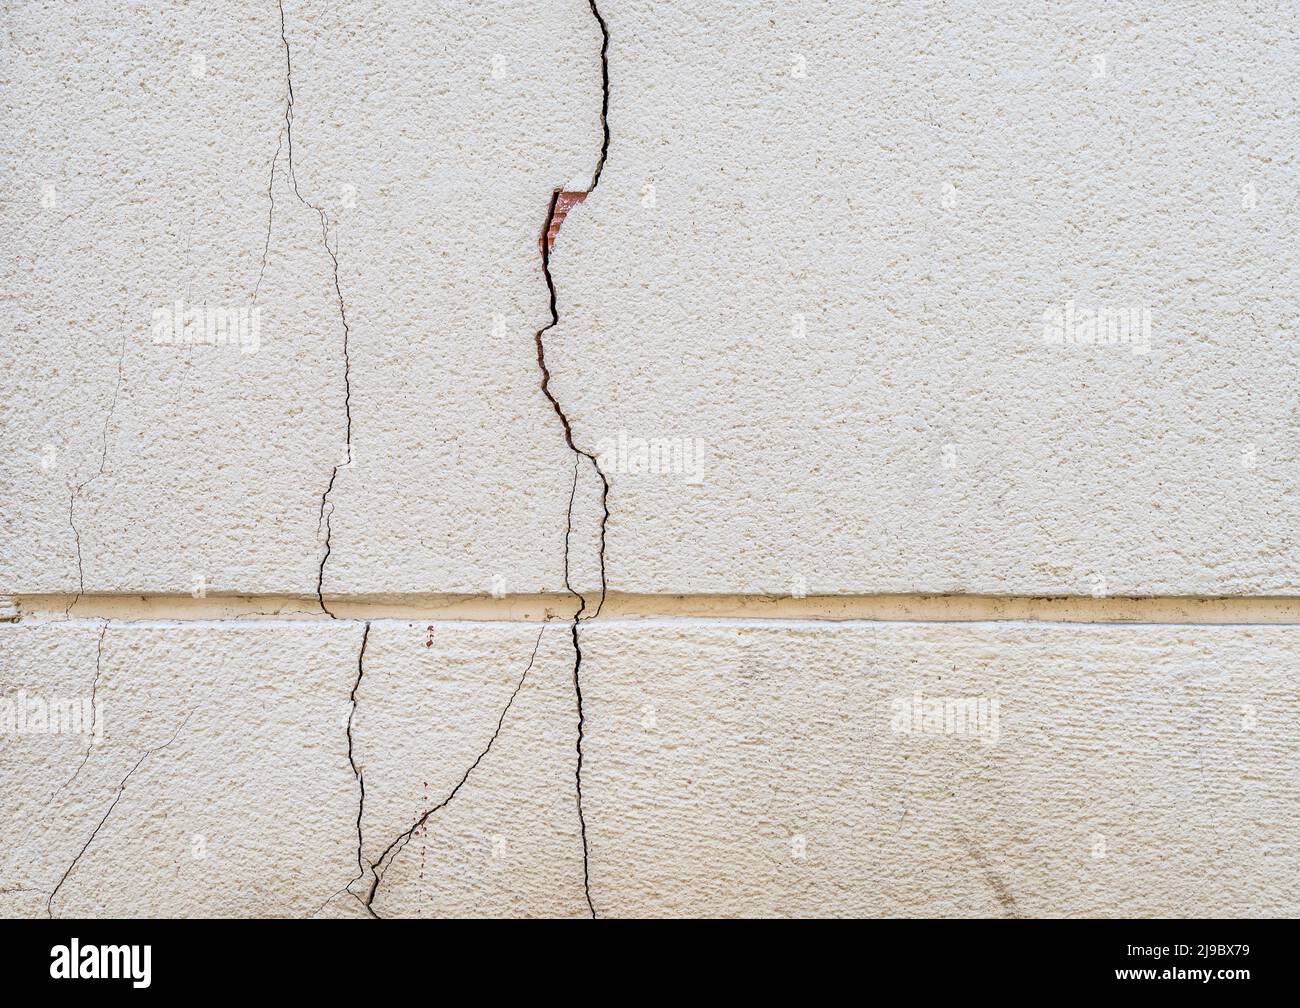 Damaged broken building facade, fissured surfaces of concrete Stock Photo